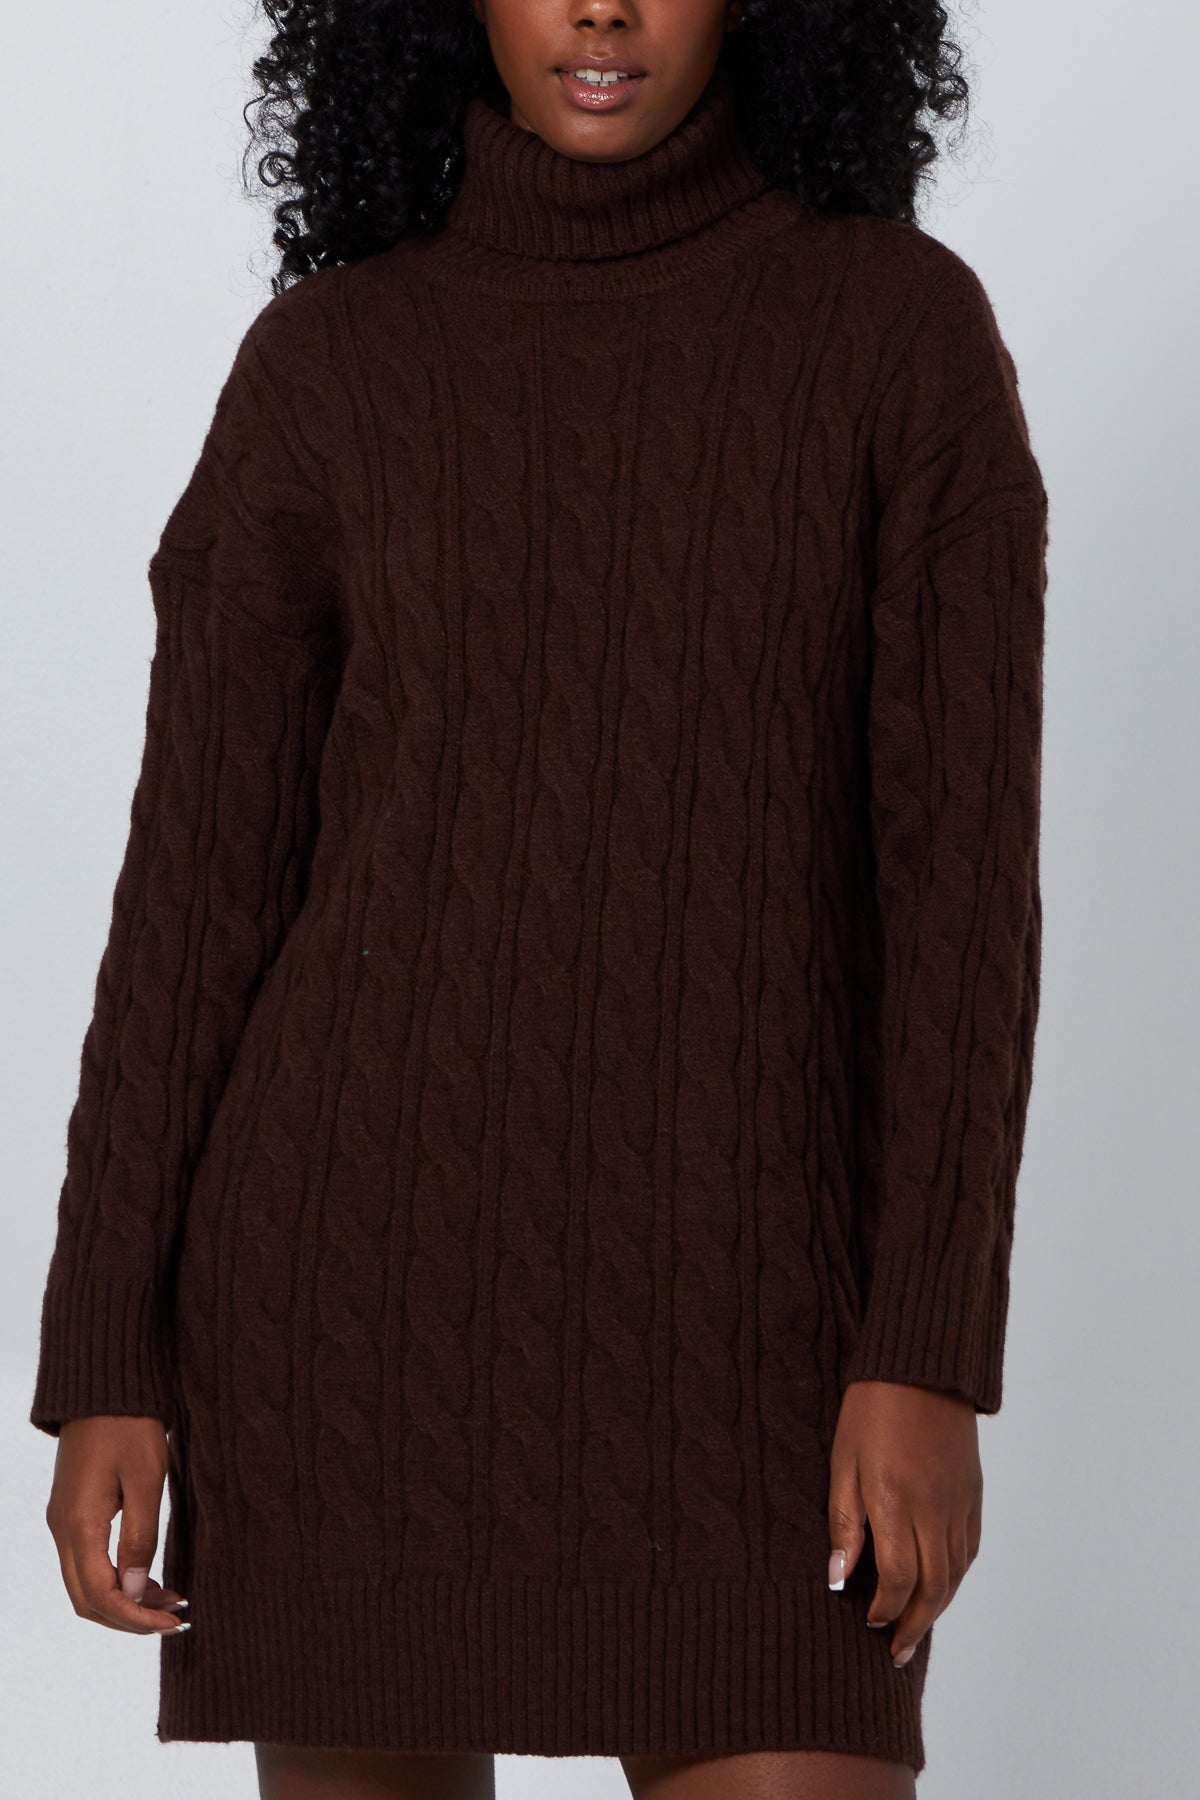 Roll Neck Heavy Cable Knit Jumper Dress